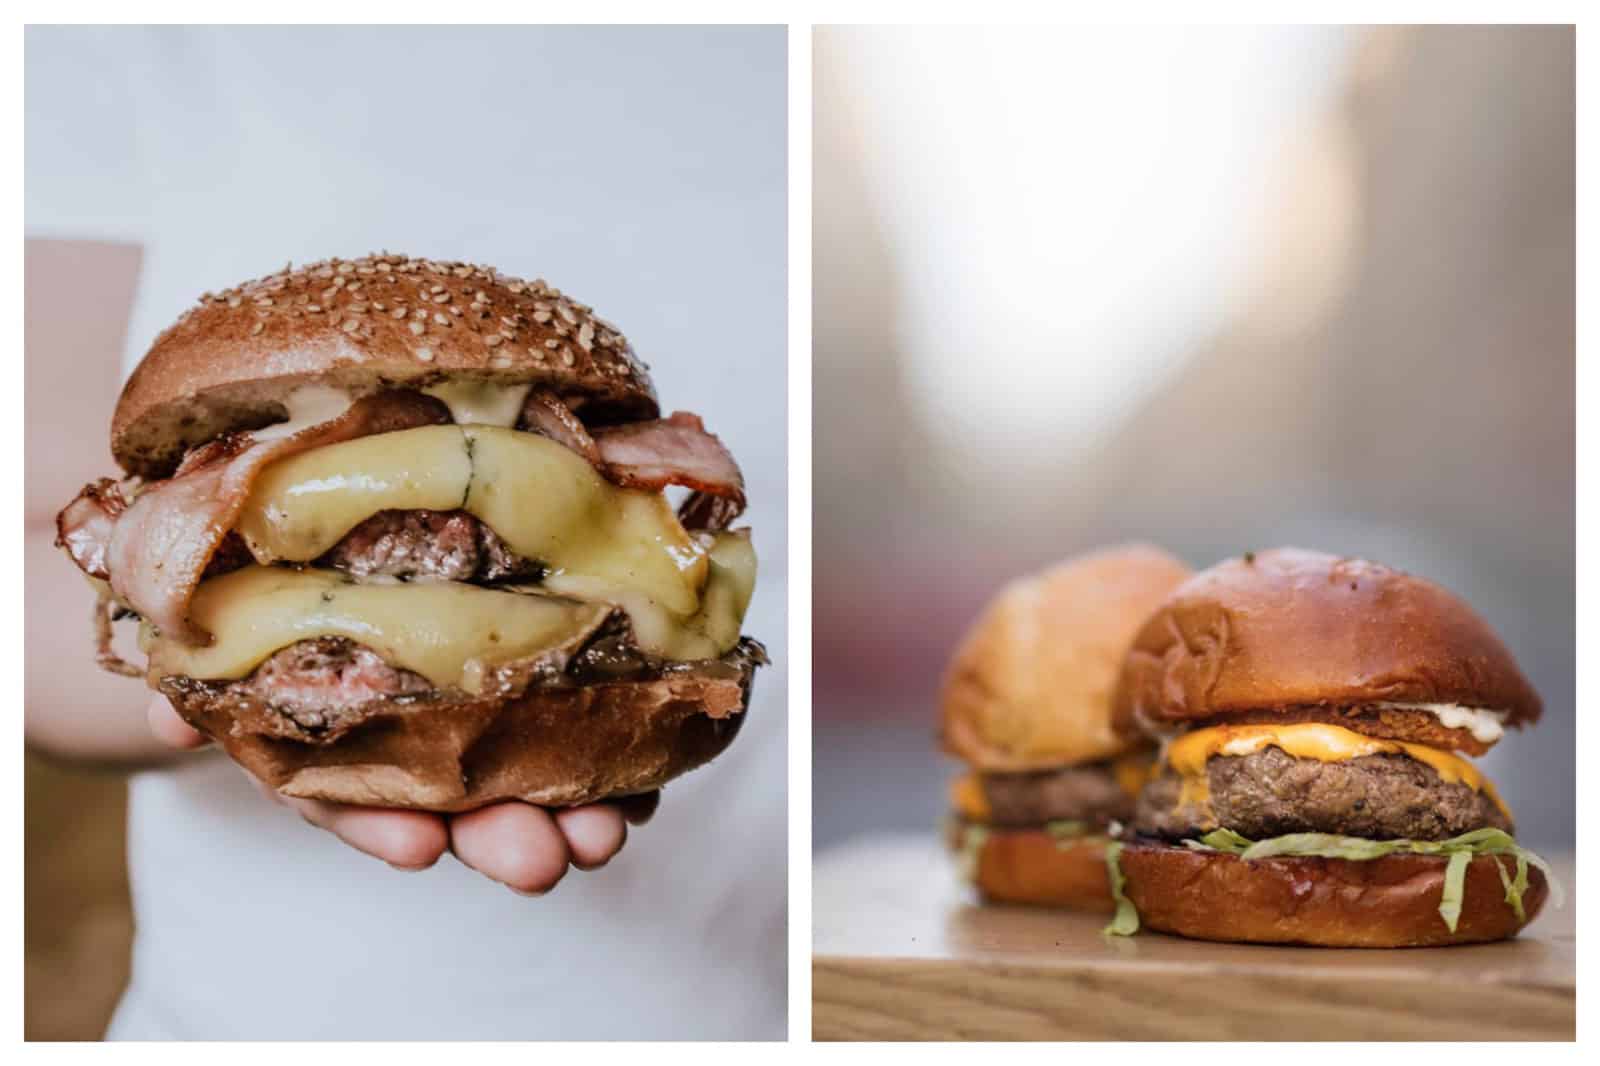 For almost guilt-free burgers in Paris, head to Bio Burger for its juicy, generously filled burgers with melted cheese and bacon (left), or Blend, which does tasty cheese burgers like these two sitting on a wooden table, in several locations all over Paris (right).